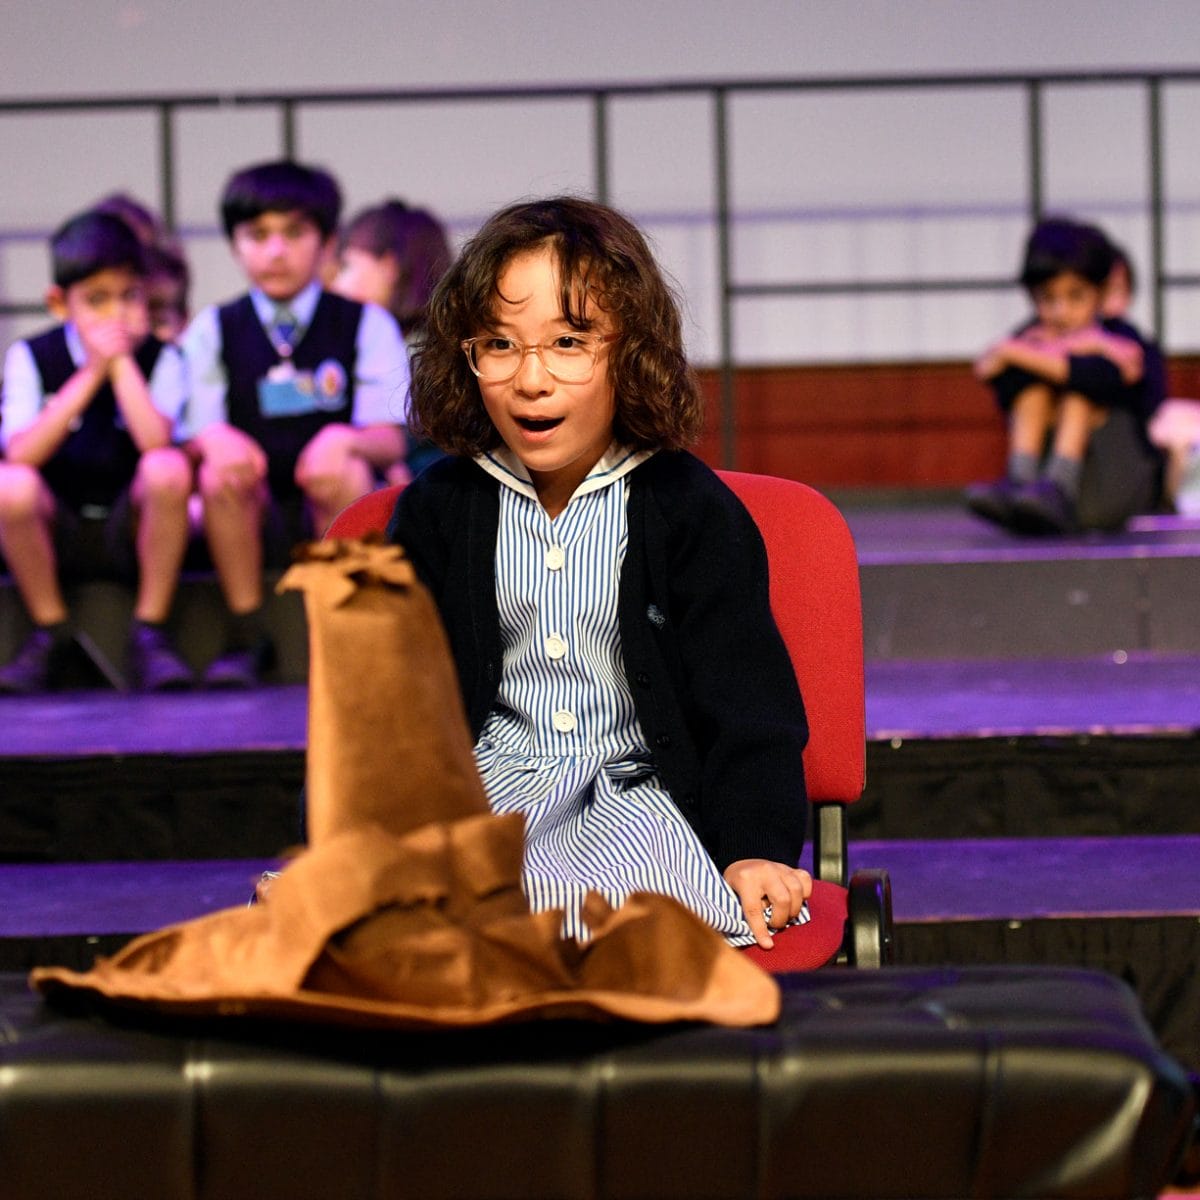 A girl sits in front of the sorting hat at the House Sorting Ceremony.